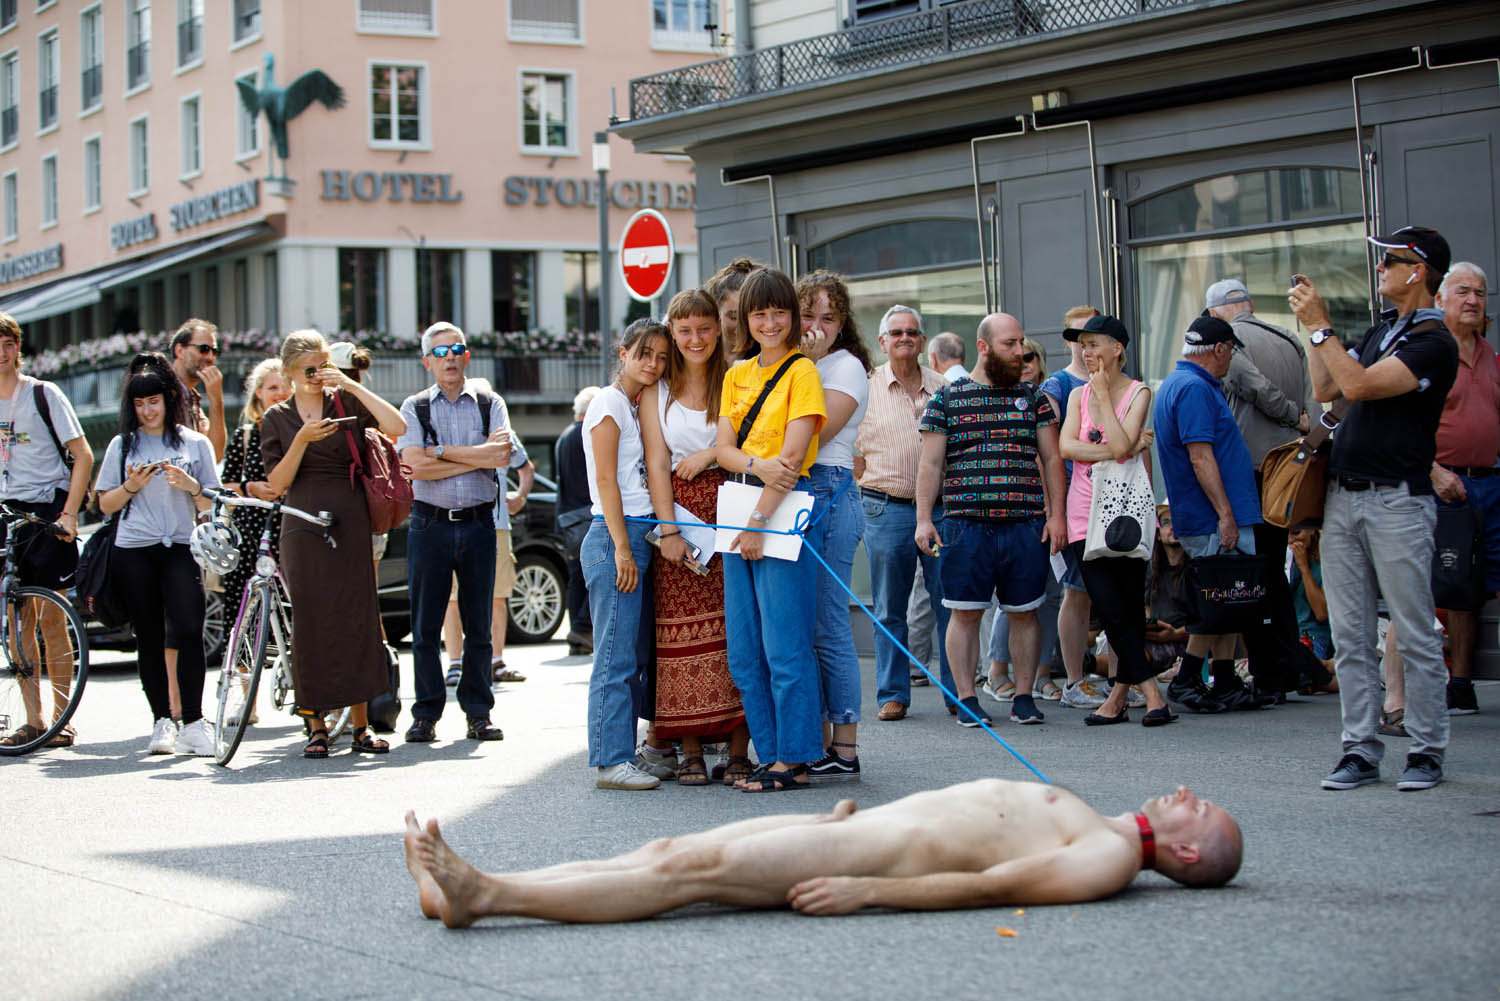 Matthias Mollner is lying naked on an asphalt floor in Zurich and is being pulled on a dog leash by several people